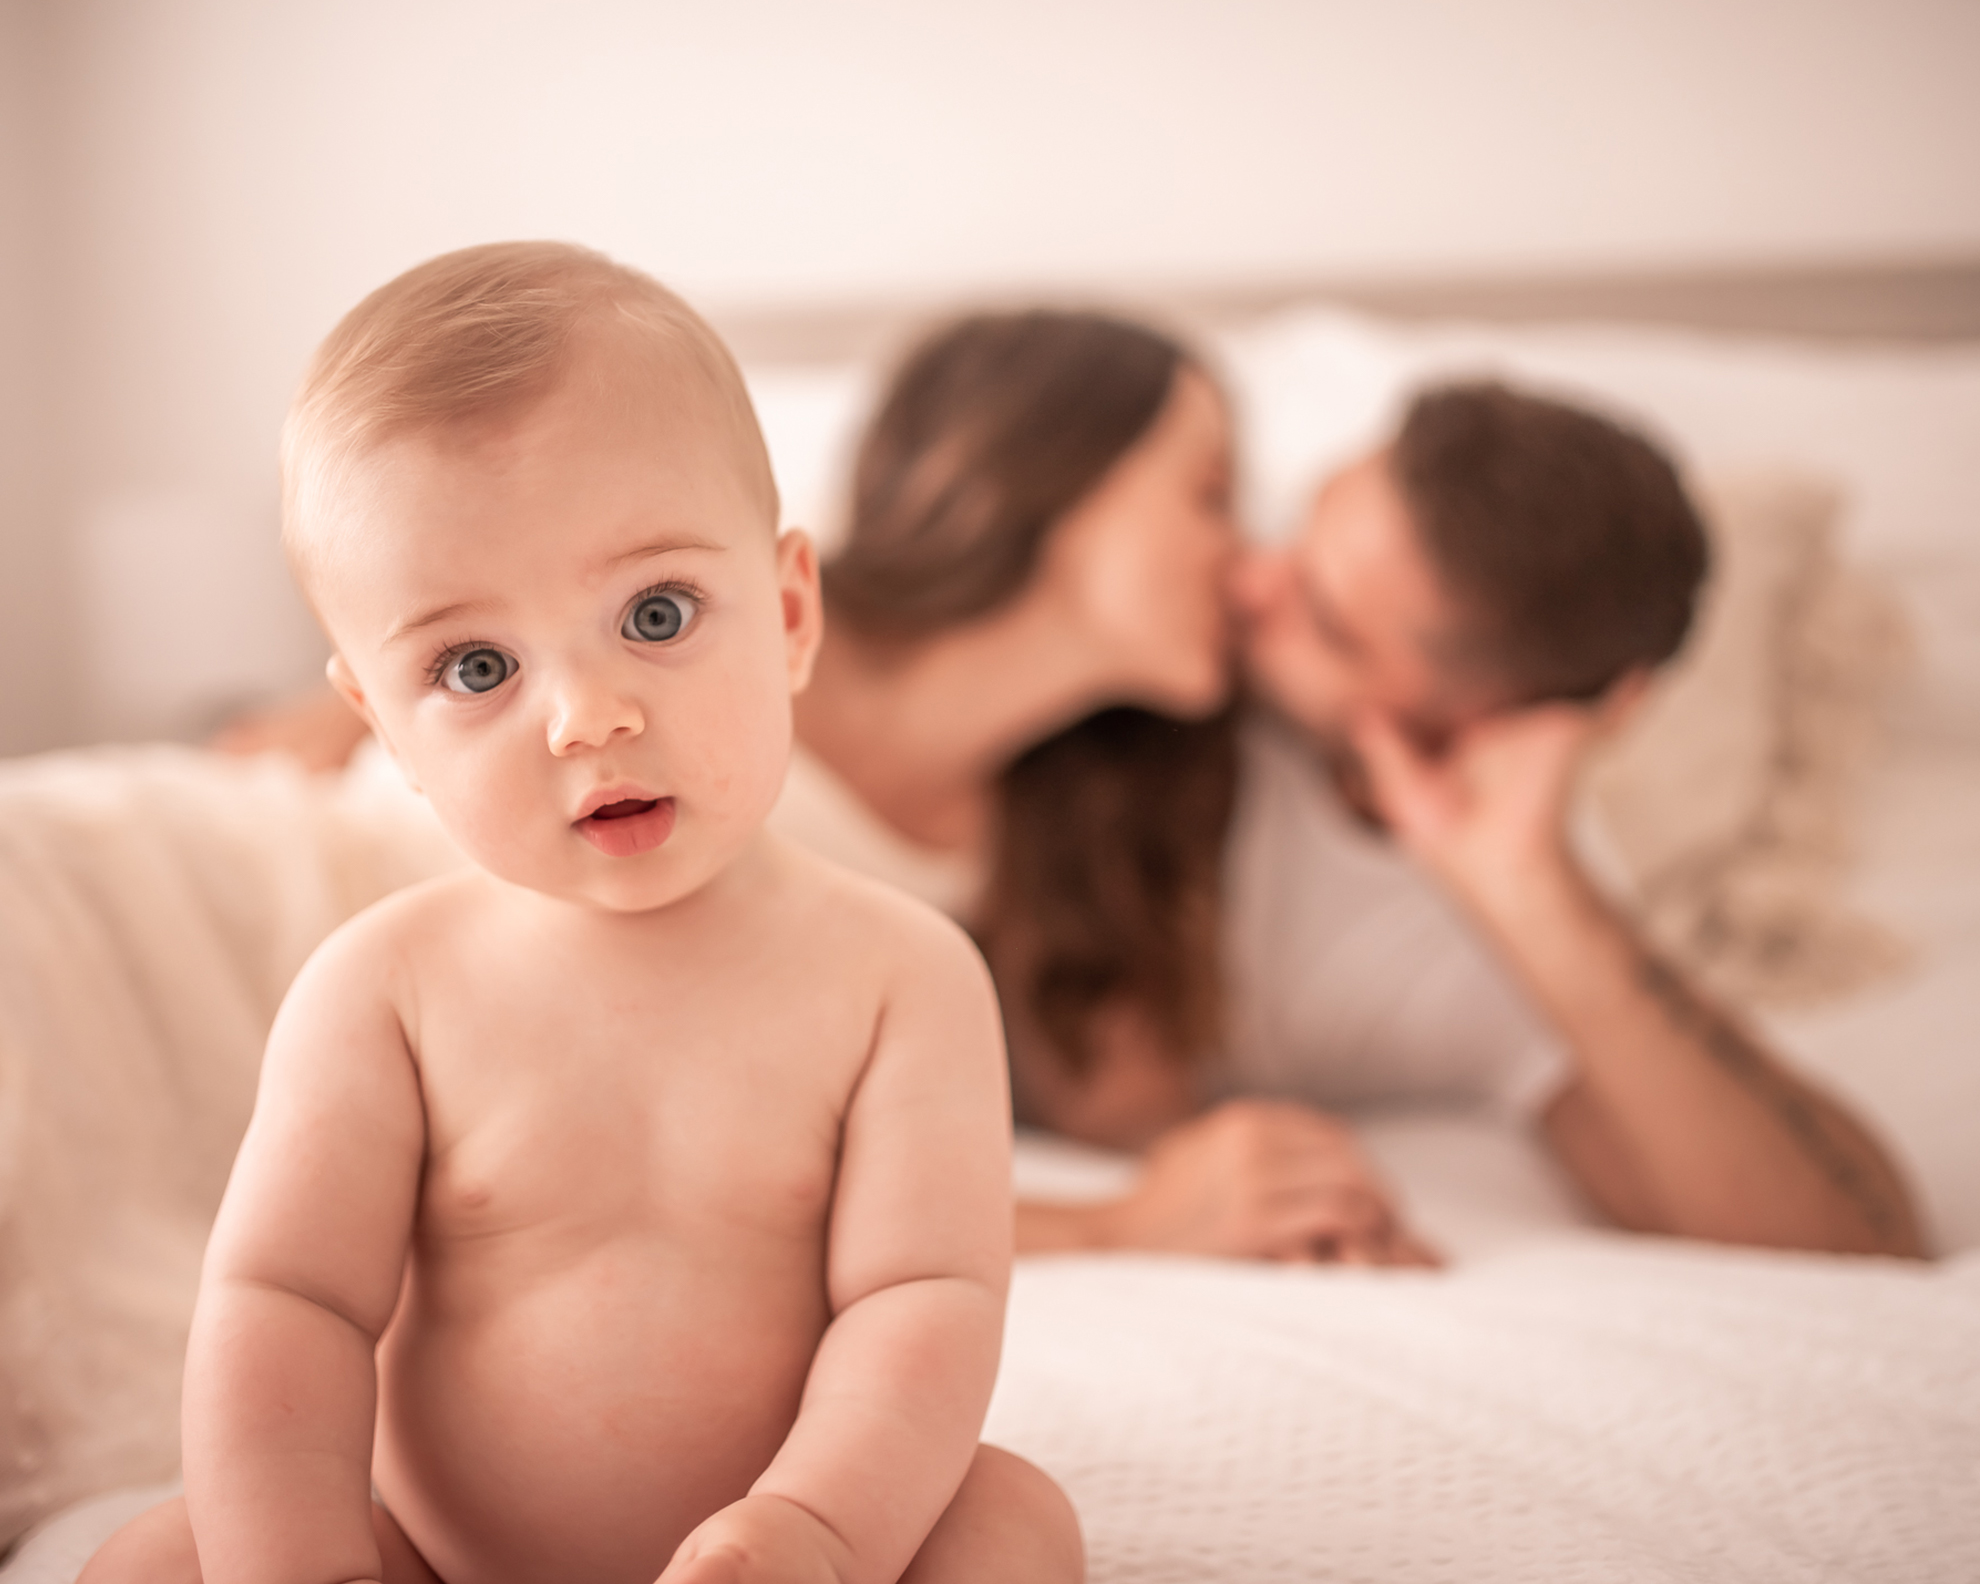 portrait of a baby in the foreground and his parents kissing in the background during at home family photoshoot